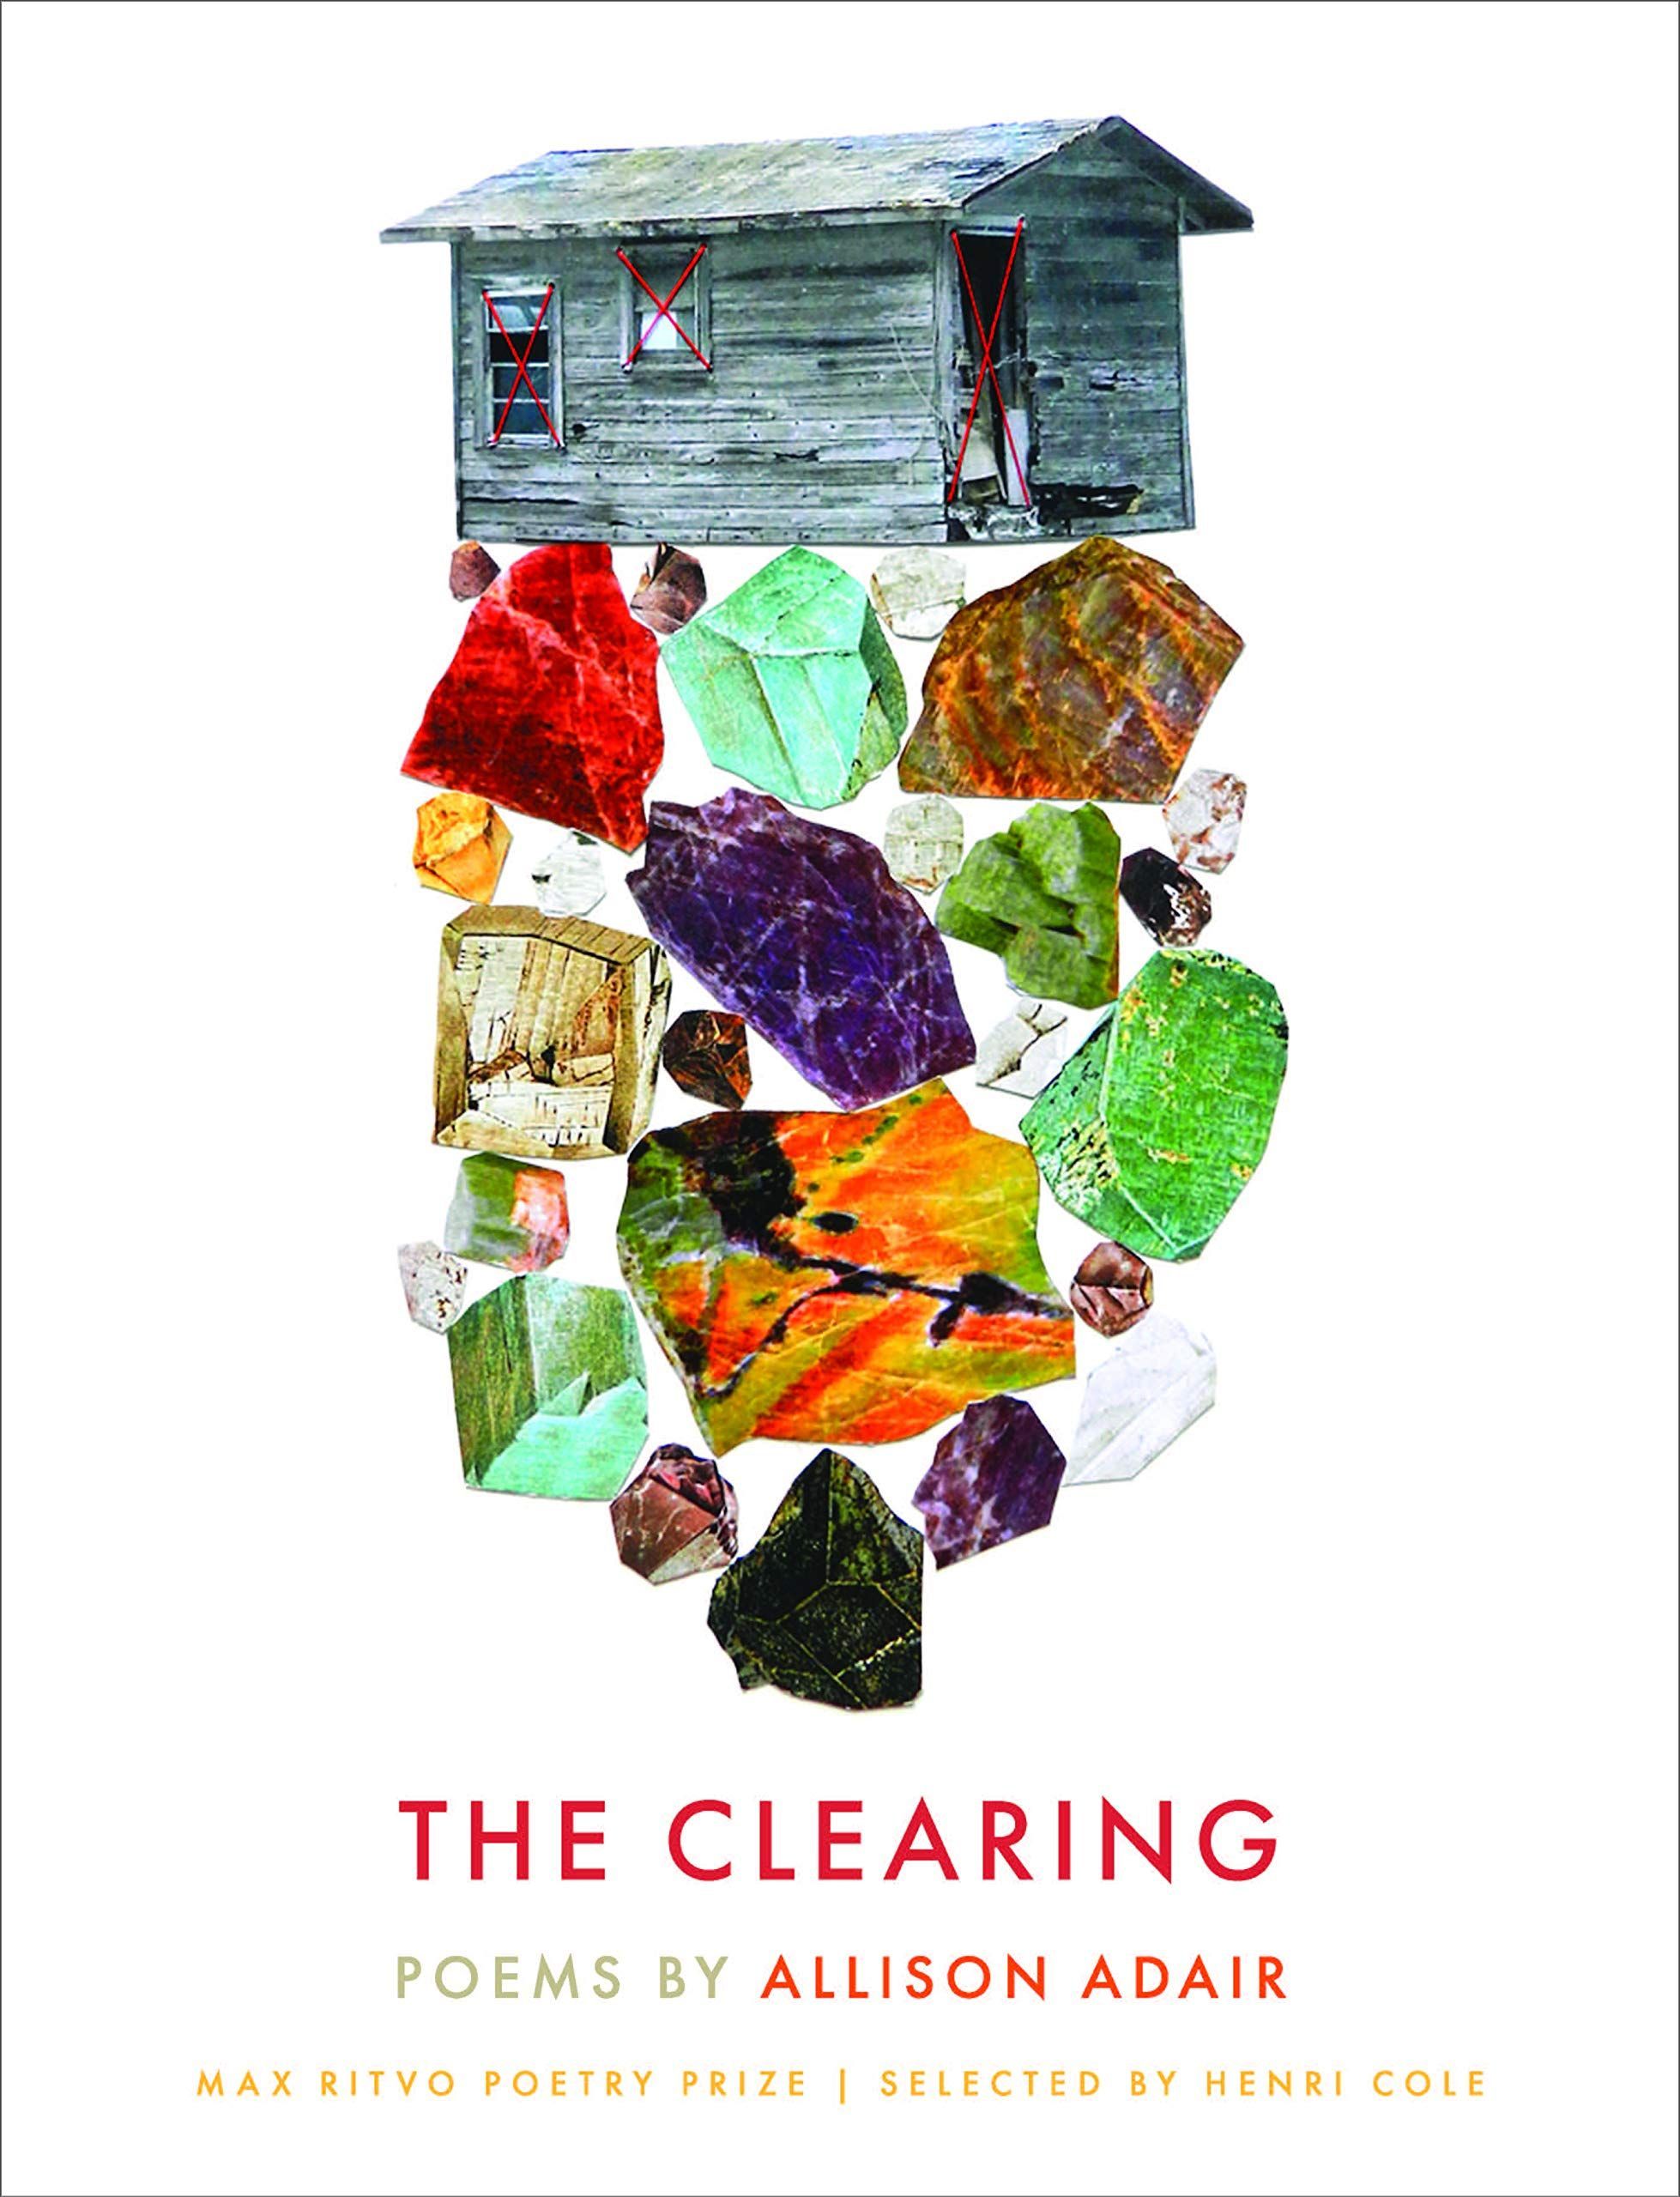 “A Country One Never Really Leaves”: On Allison Adair’s “The Clearing”